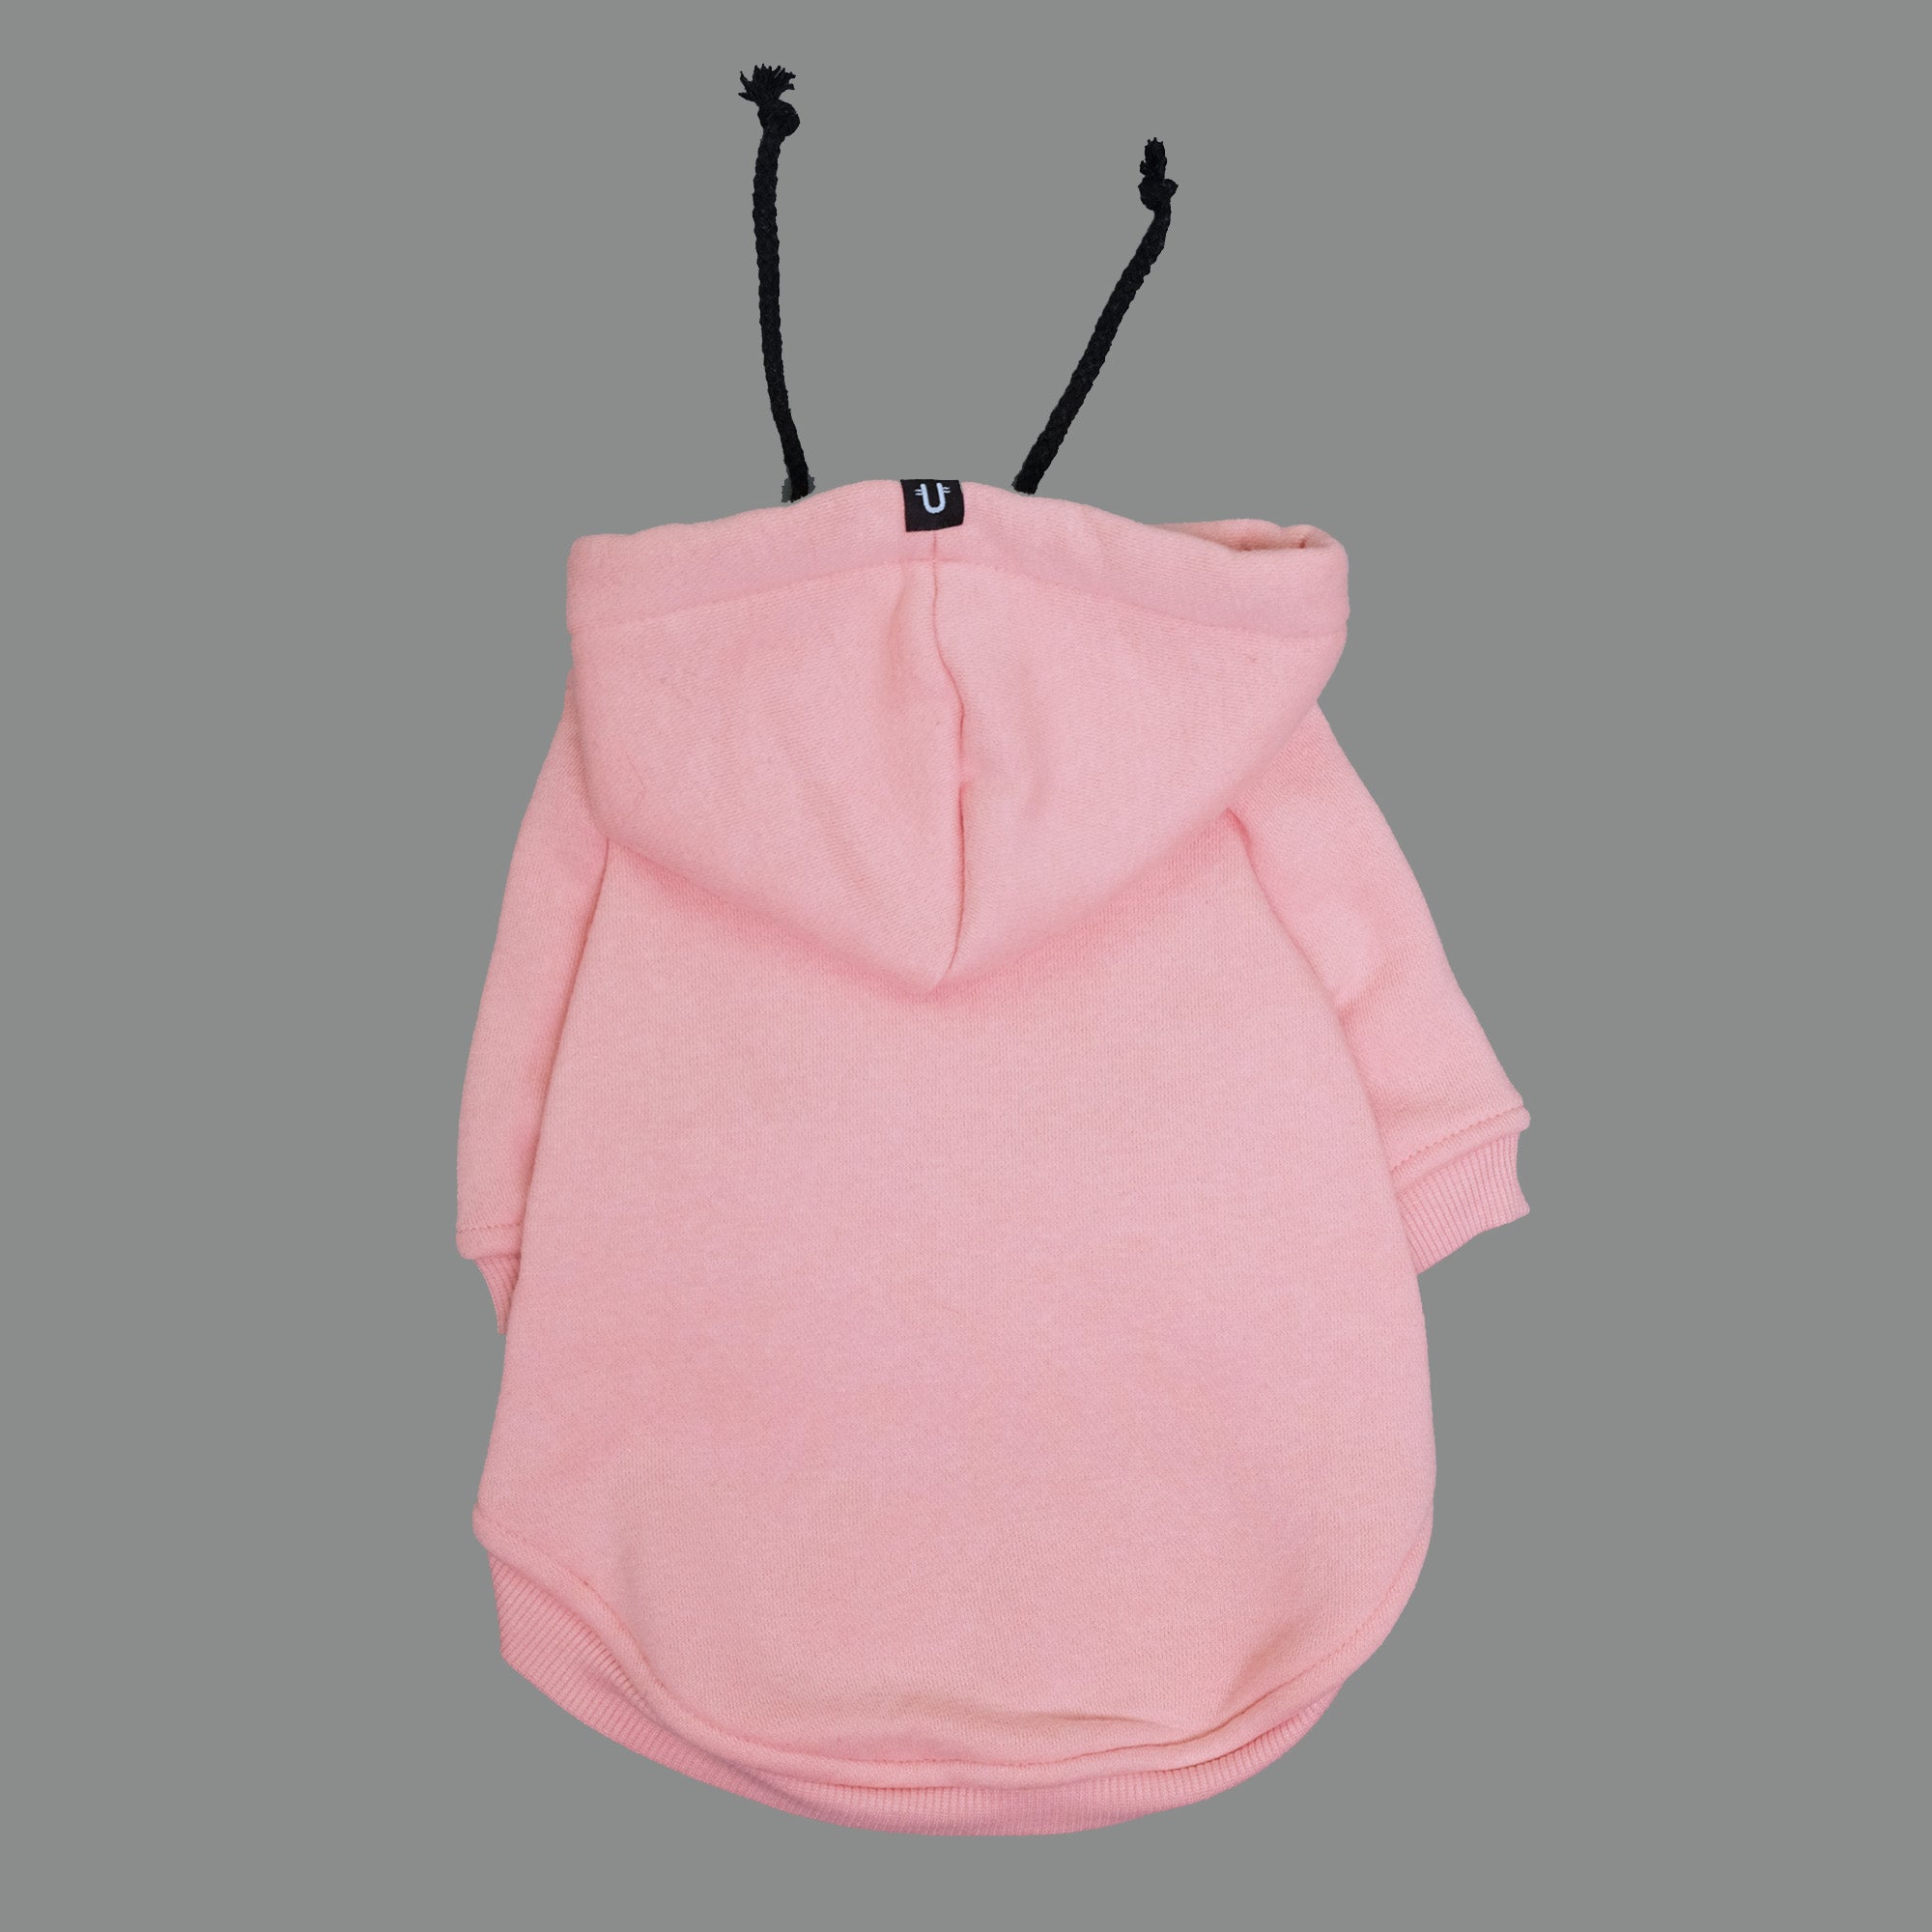 Pink dog hoodie fits big and small dogs made by Pethaus Australia